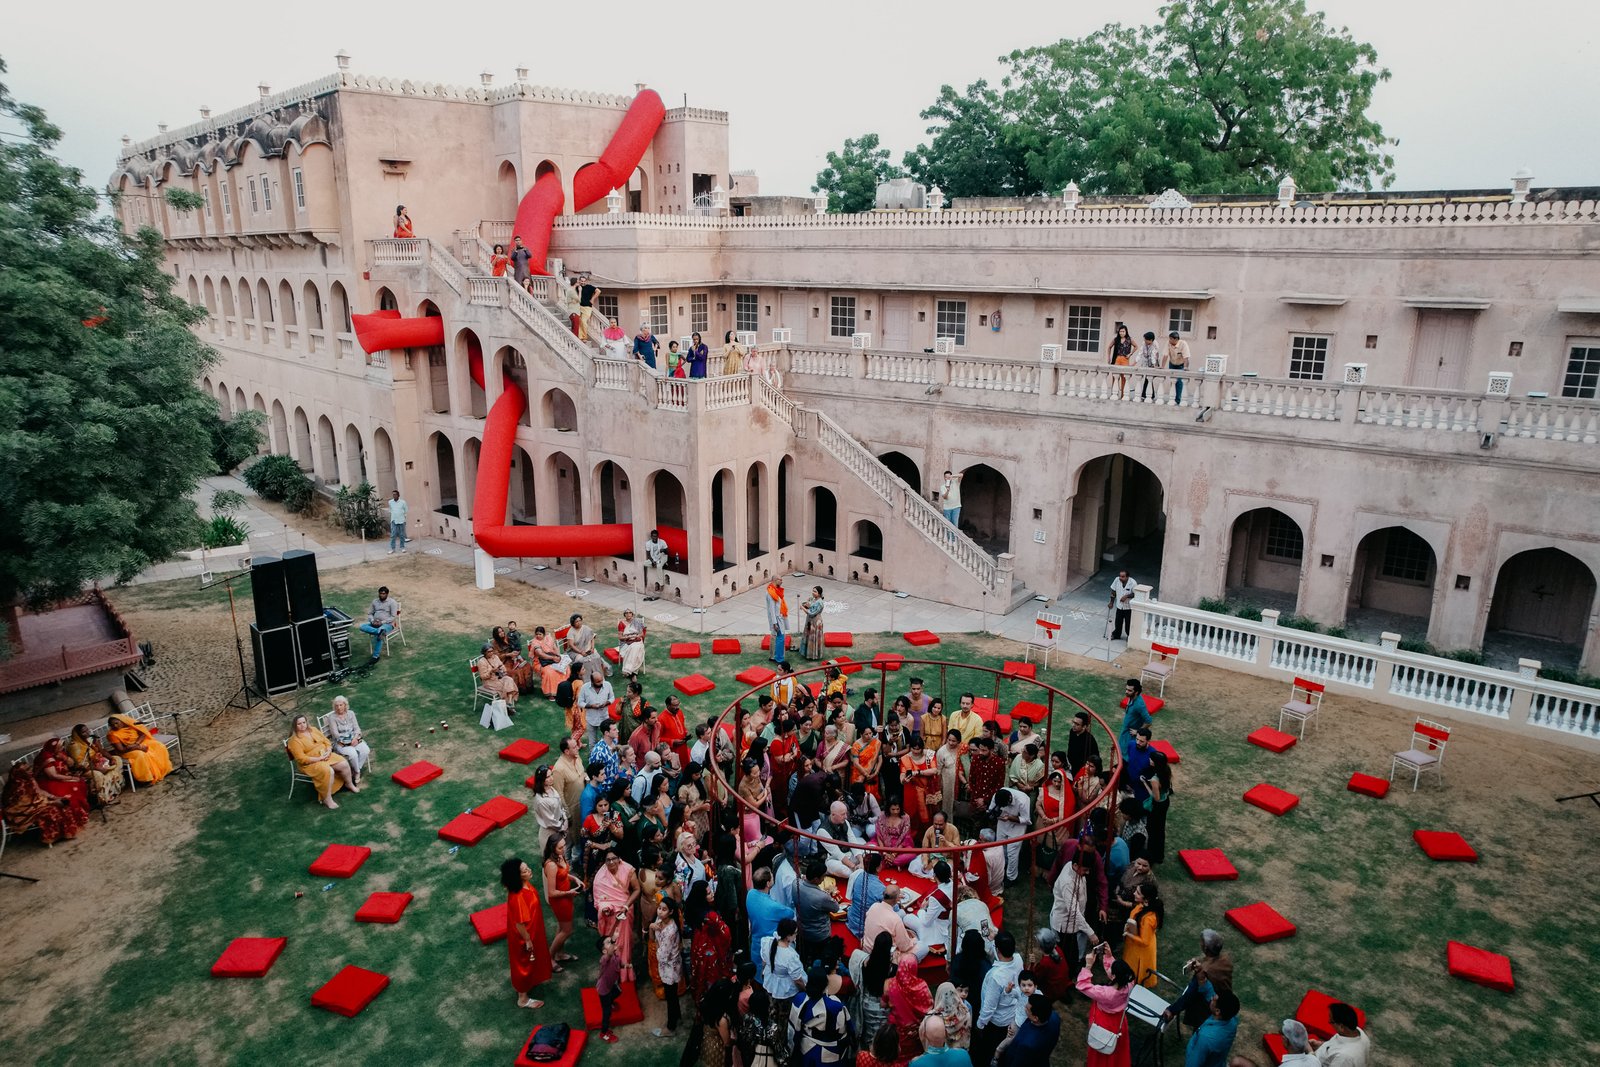 People in the courtyard of an Indian castle with a large inflatable artwork woven through recesses and windows